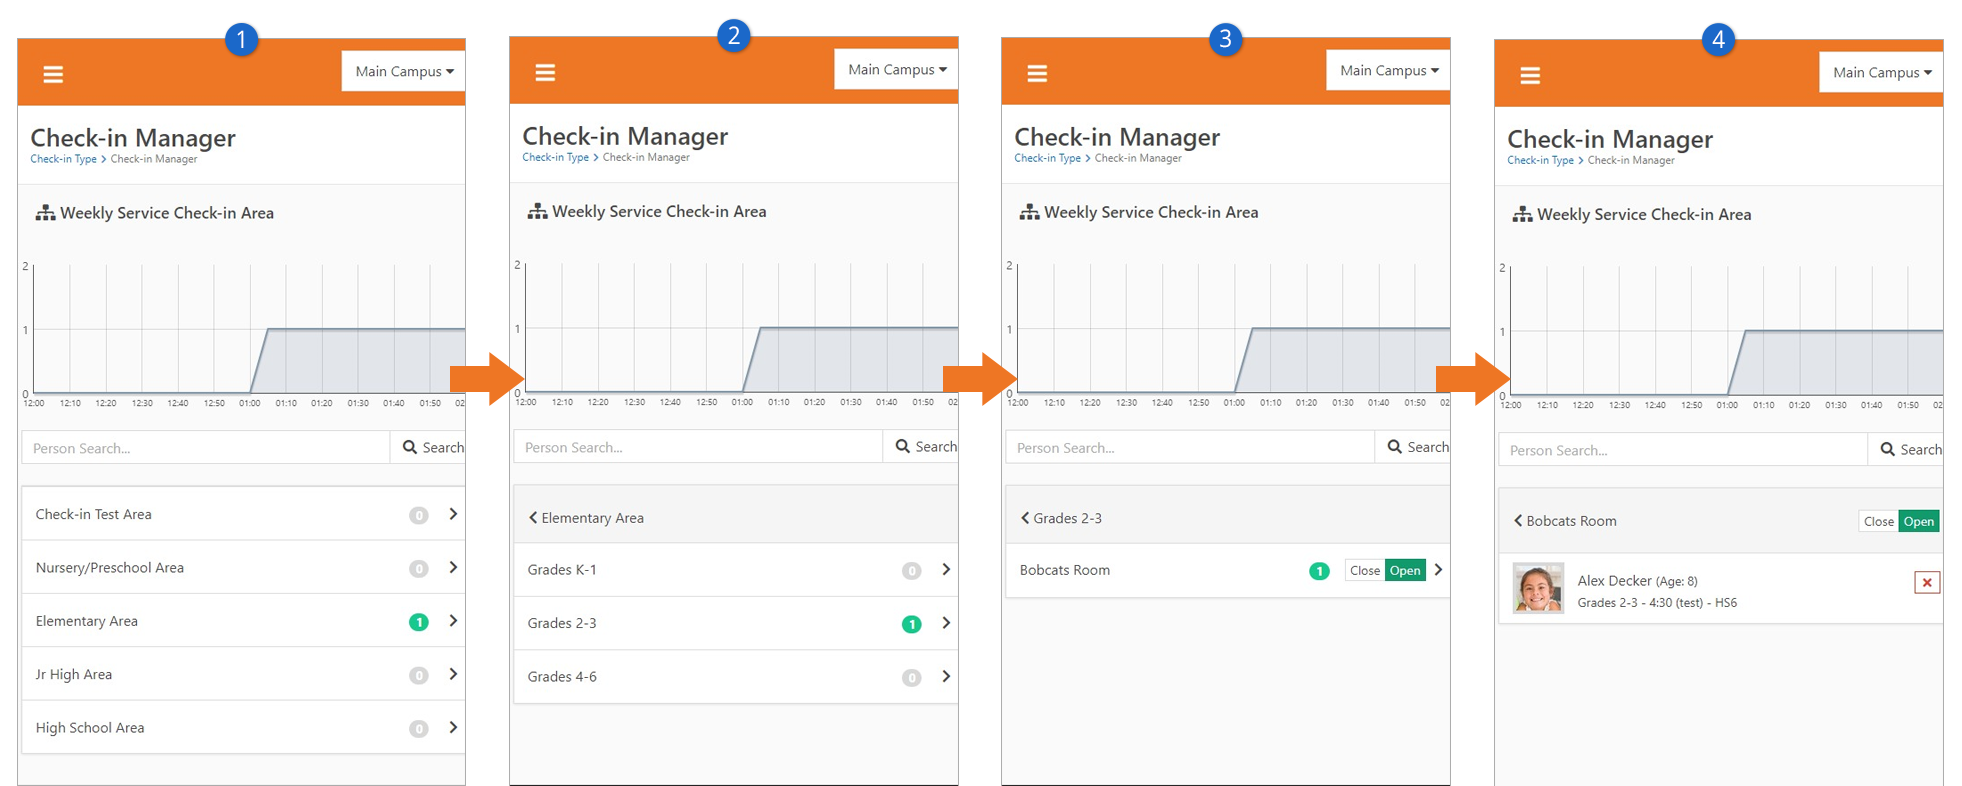 Check-in Manager Screenflow